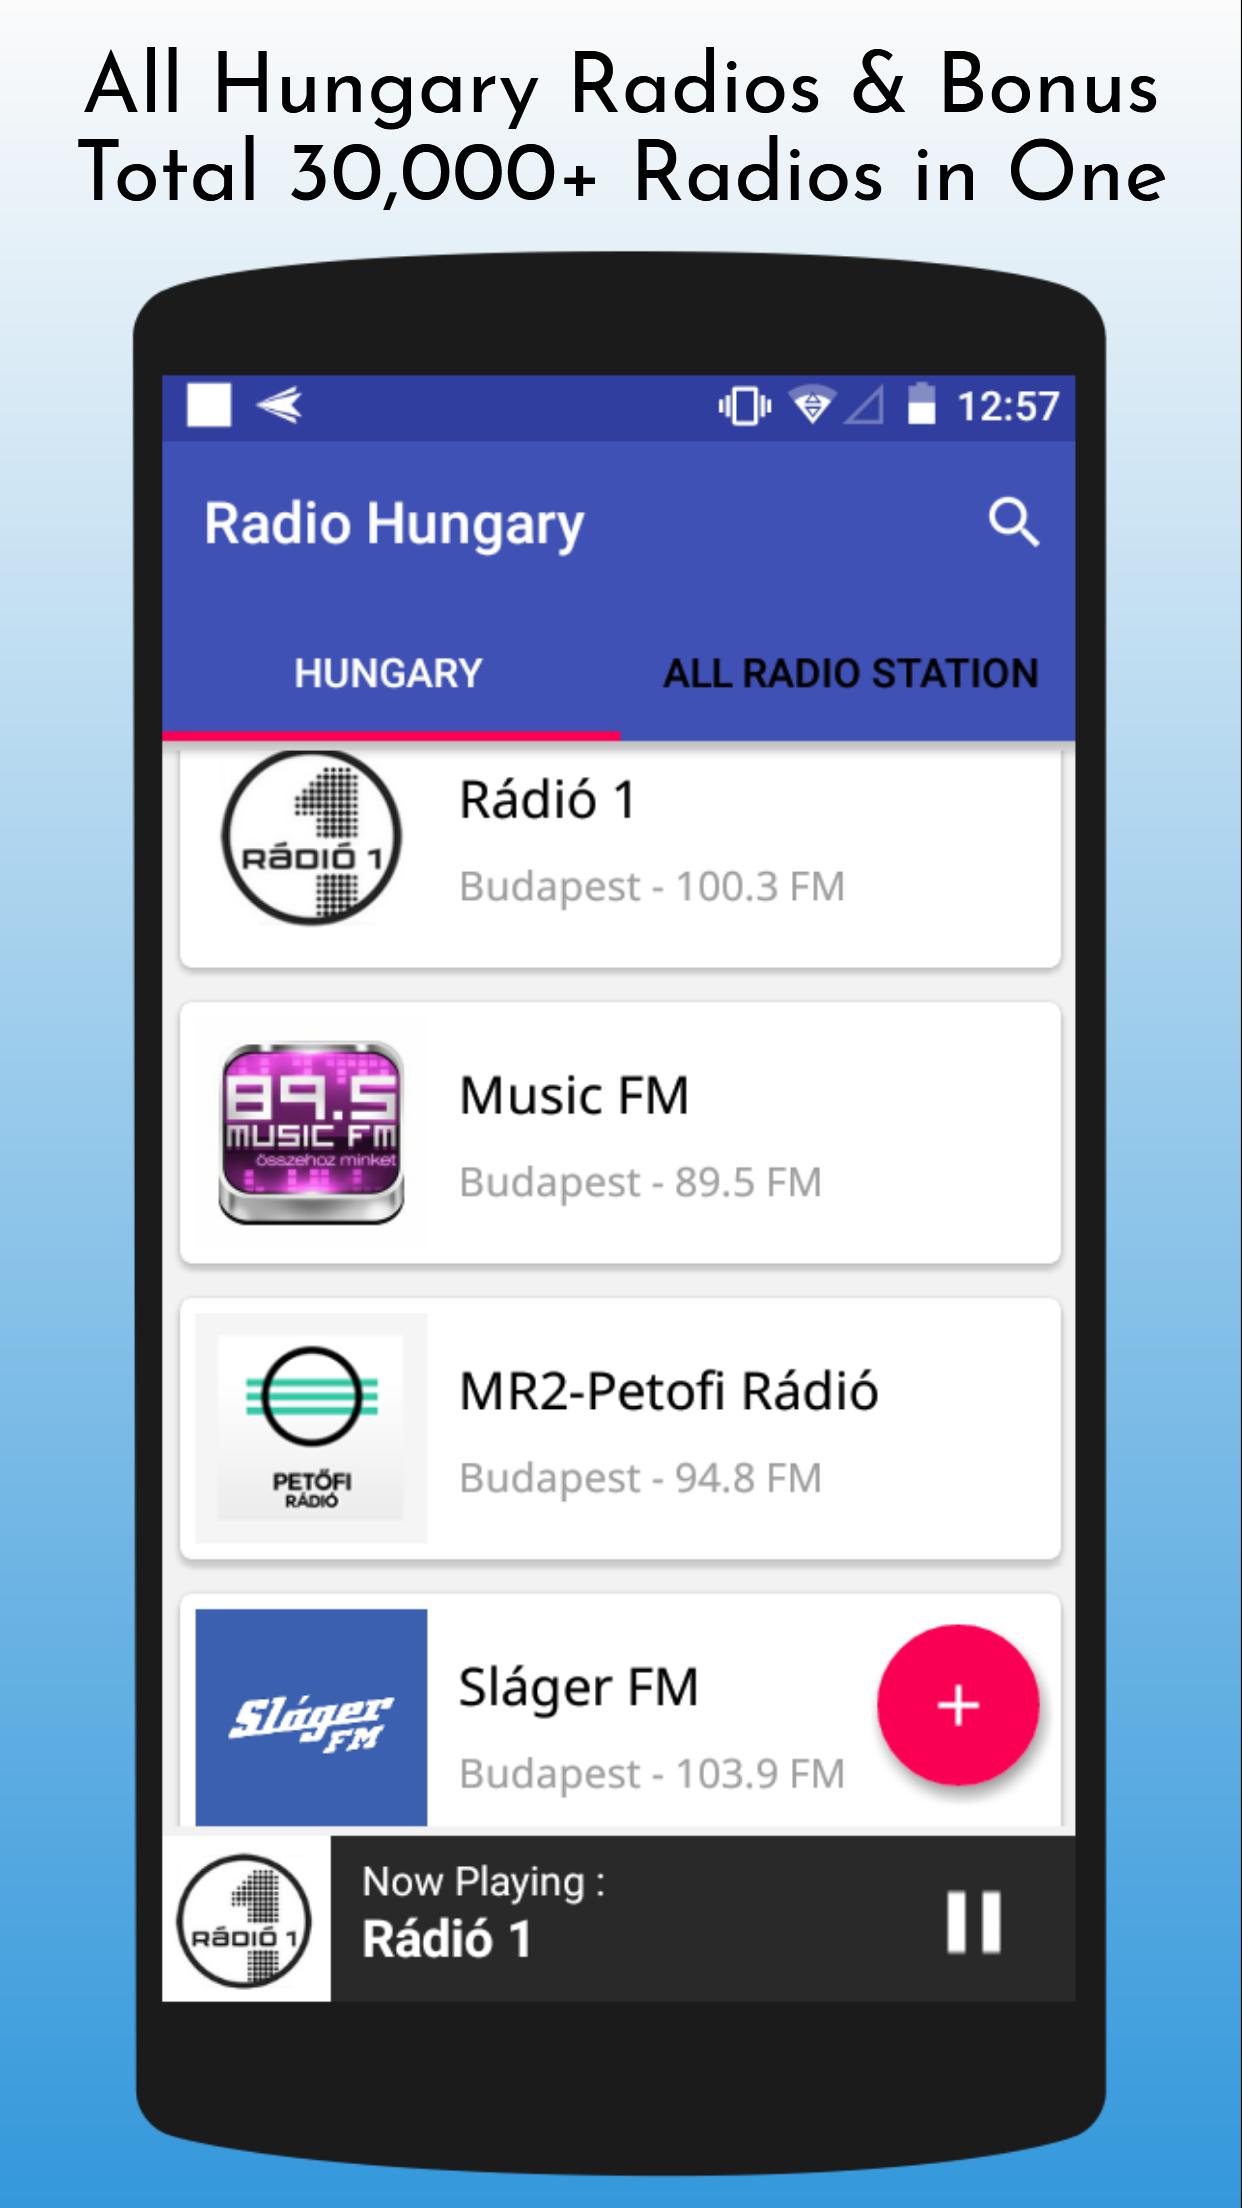 All Hungary Radios for Android - APK Download